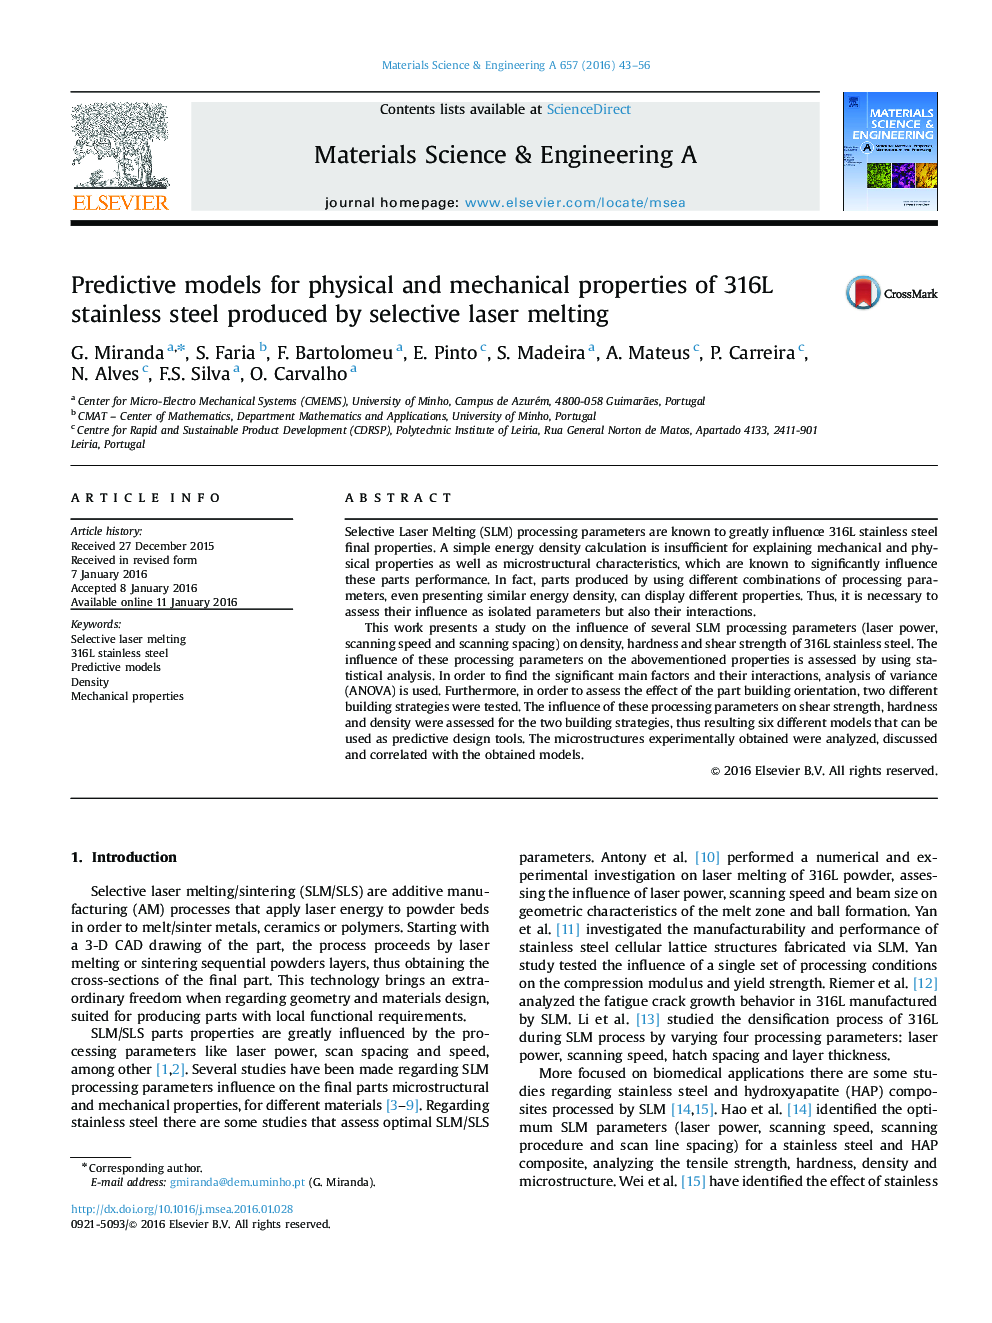 Predictive models for physical and mechanical properties of 316L stainless steel produced by selective laser melting